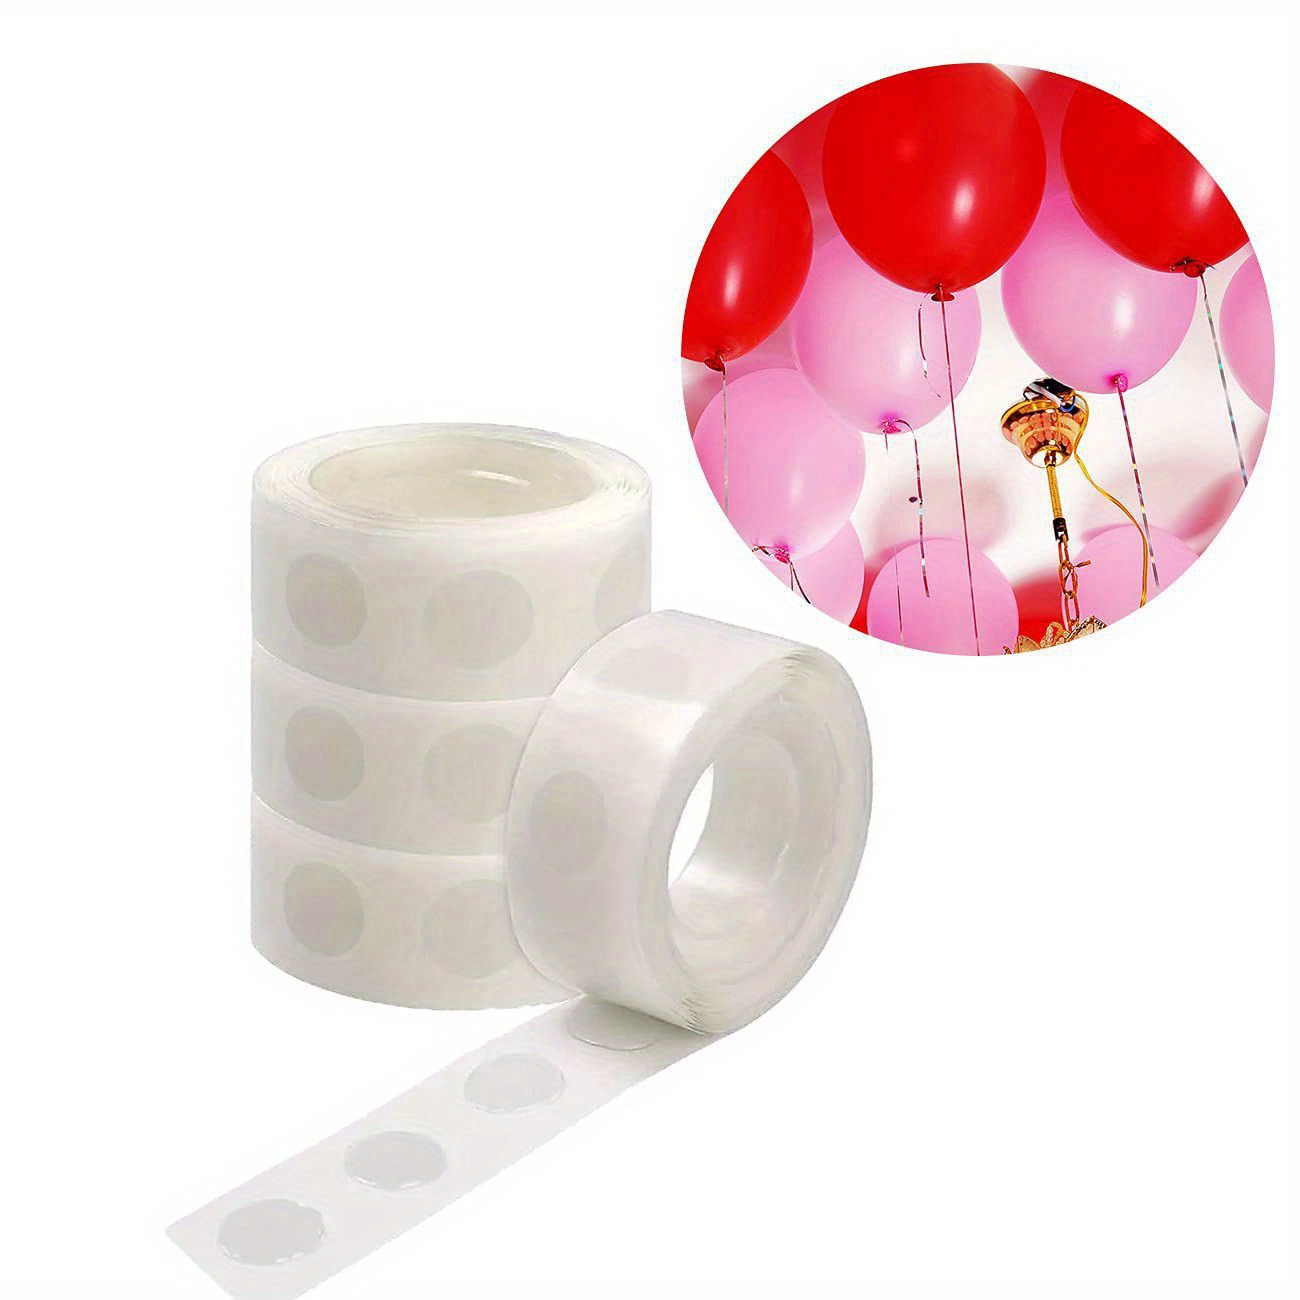 10 Rolls Glue Dots Double-Sided Balloon Glue Tape Craft Dots for Scrapbook, Party, Wedding, Balloons Decoration